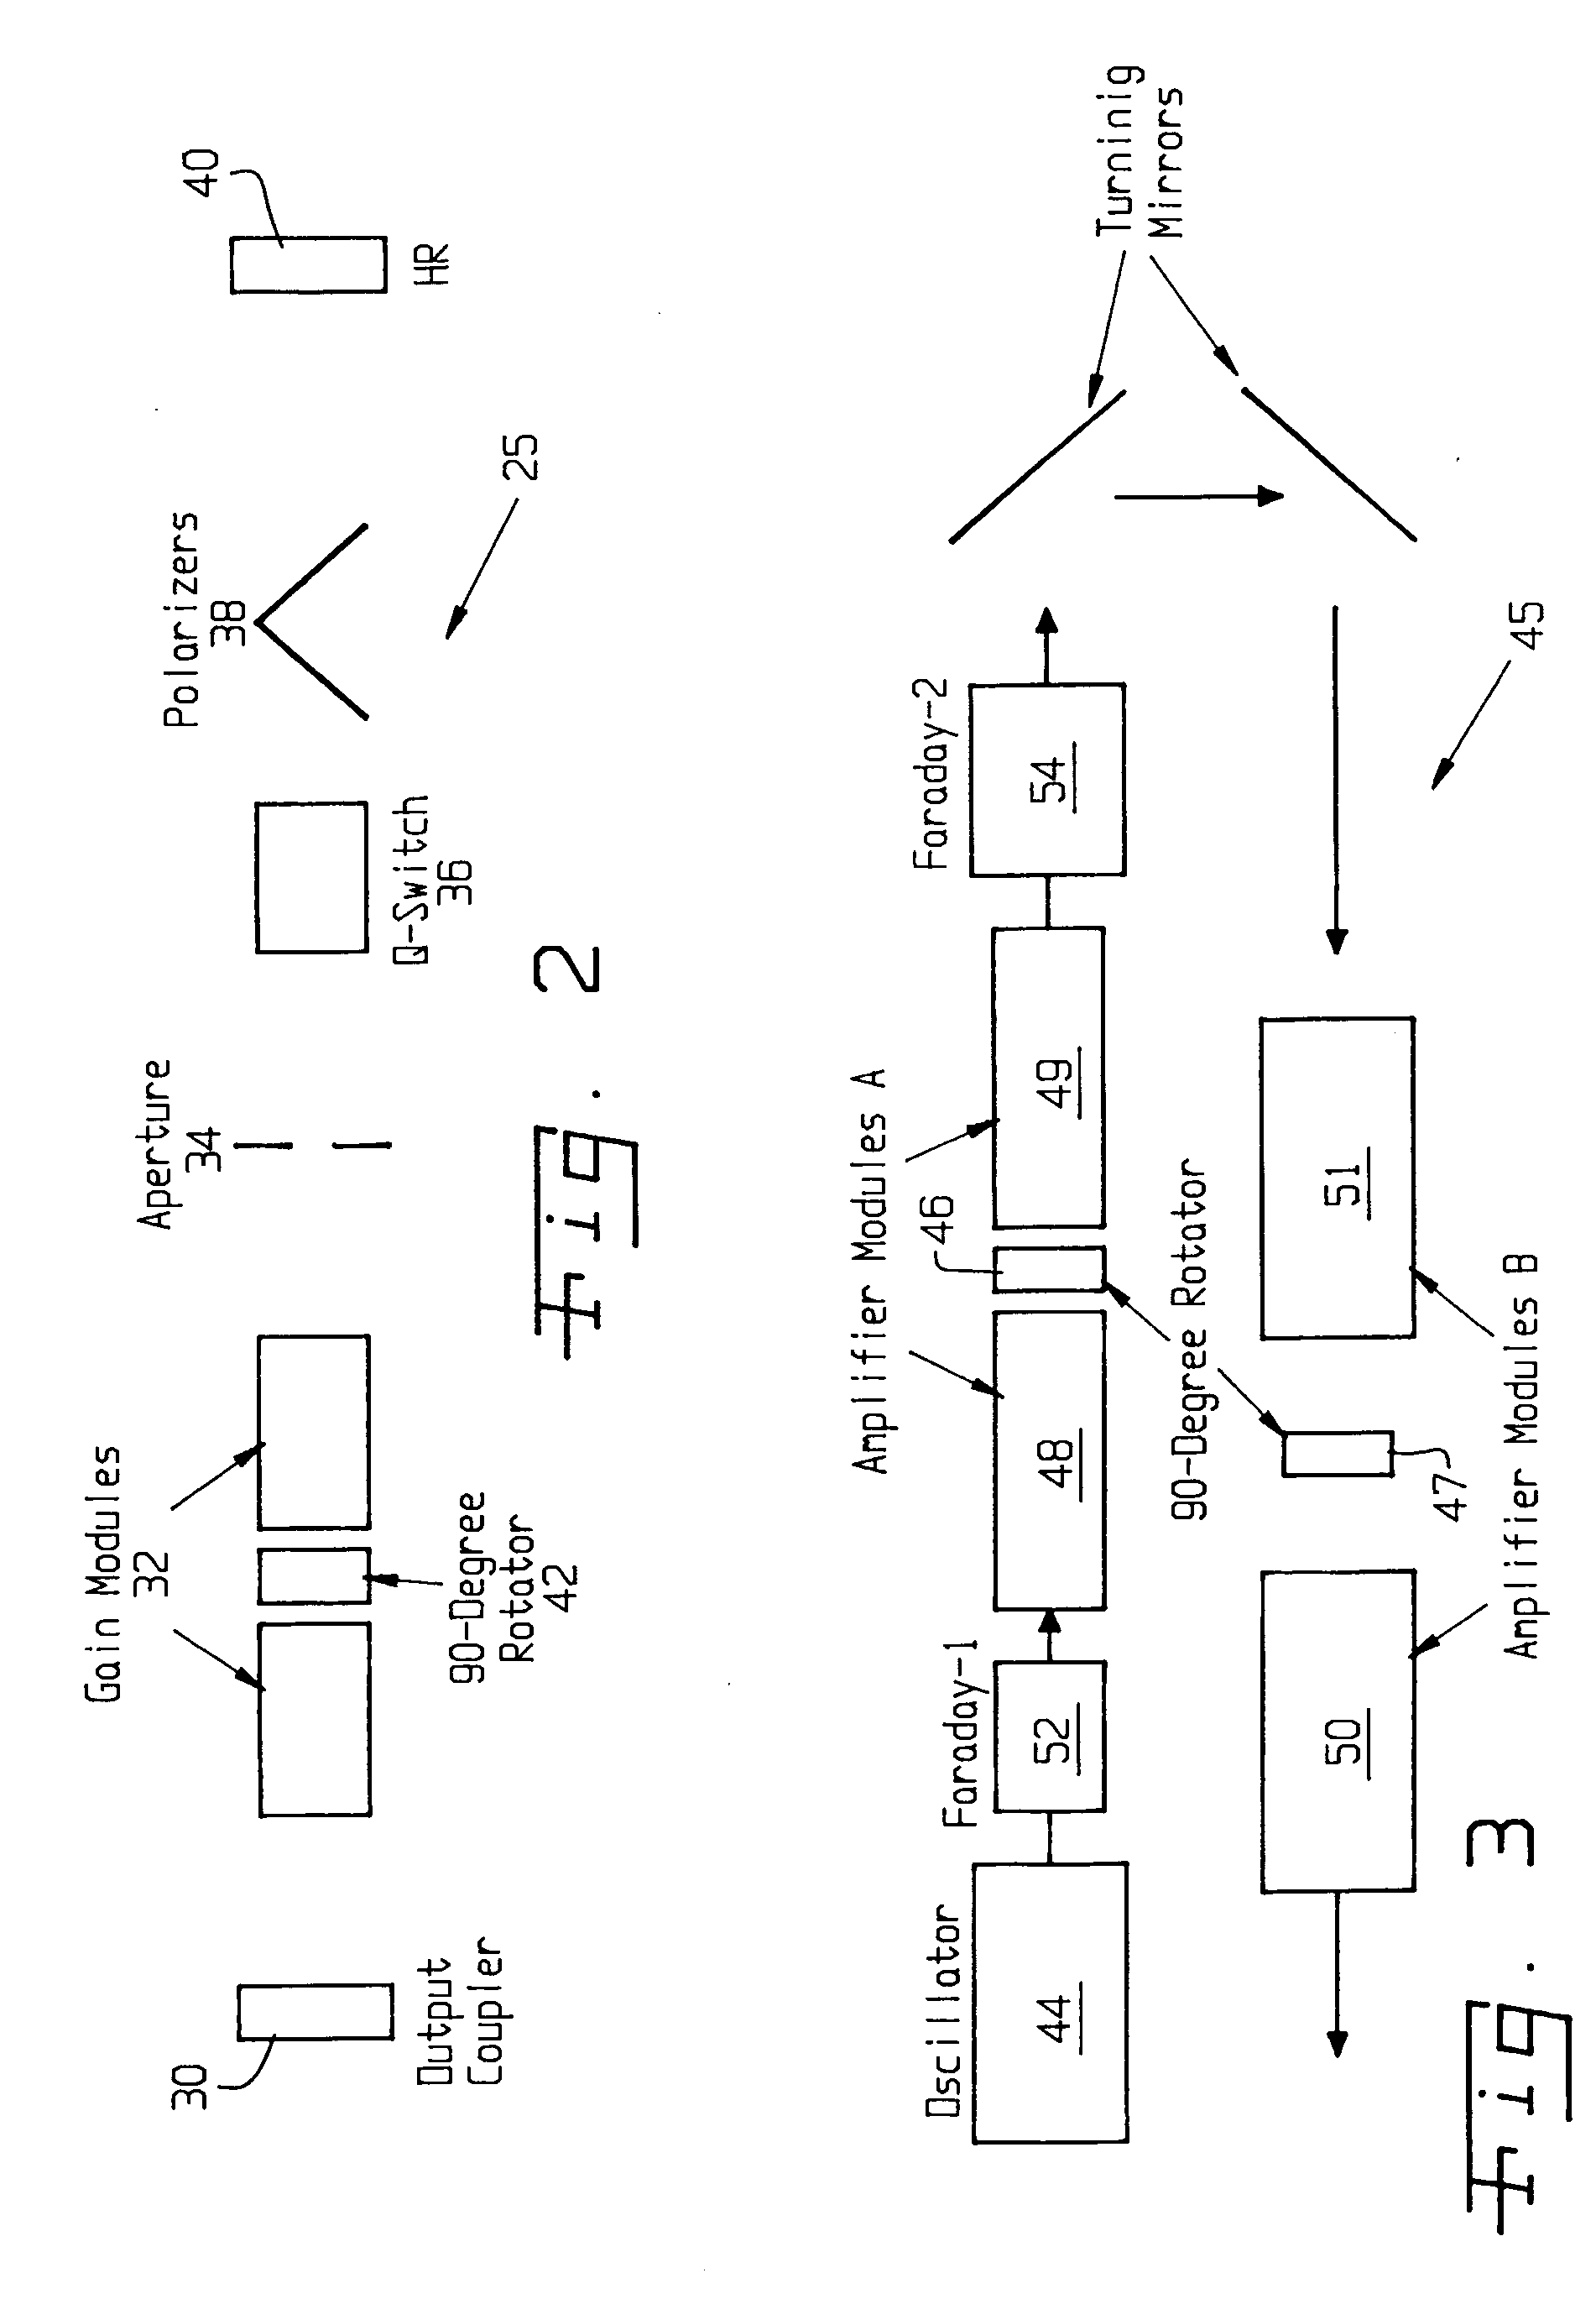 Laser system and method for non-destructive bond detection and evaluation